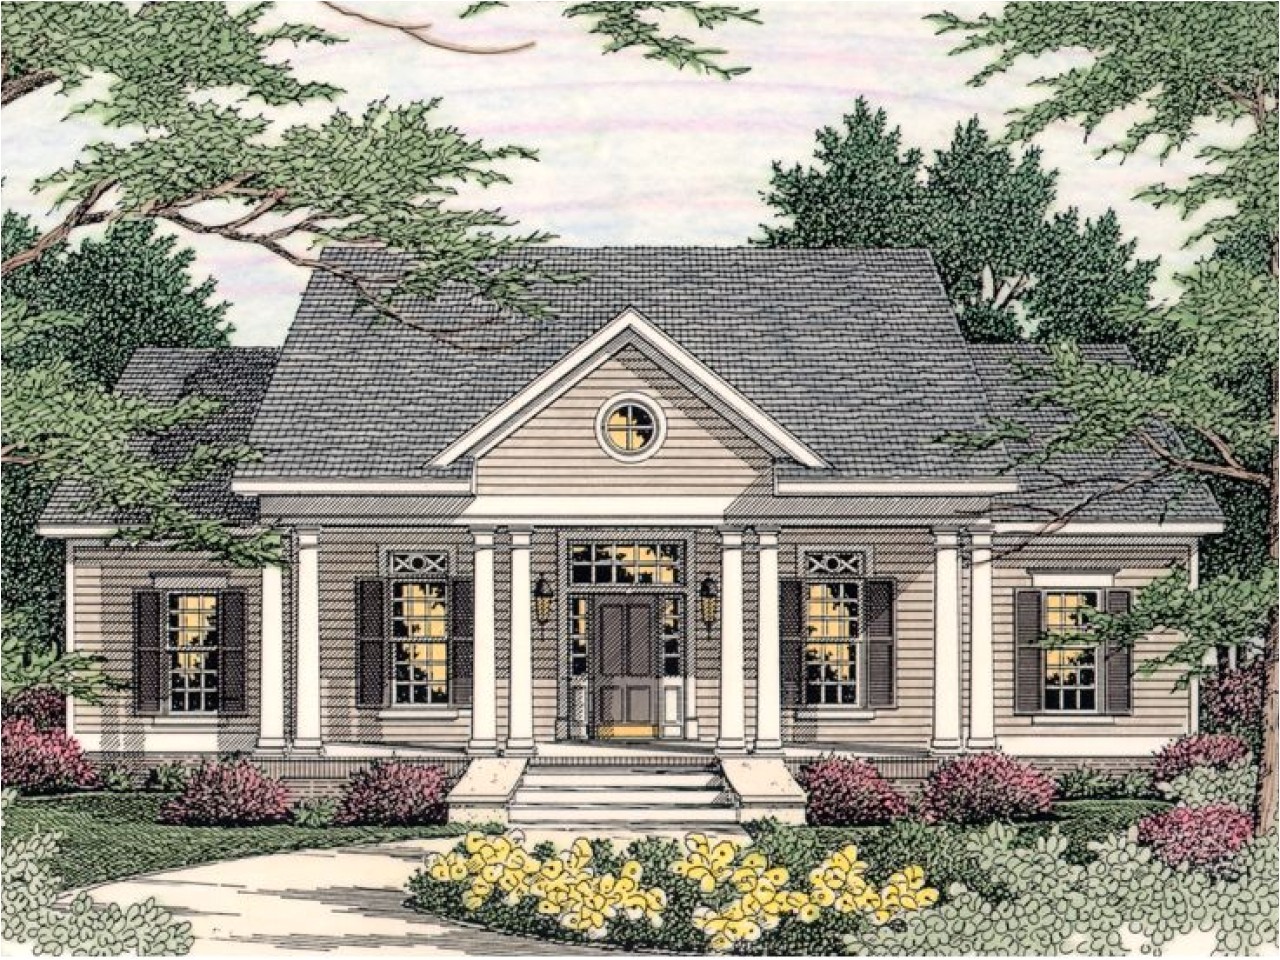 3a66e15f14ab4fa8 small southern colonial house plans colonial style homes